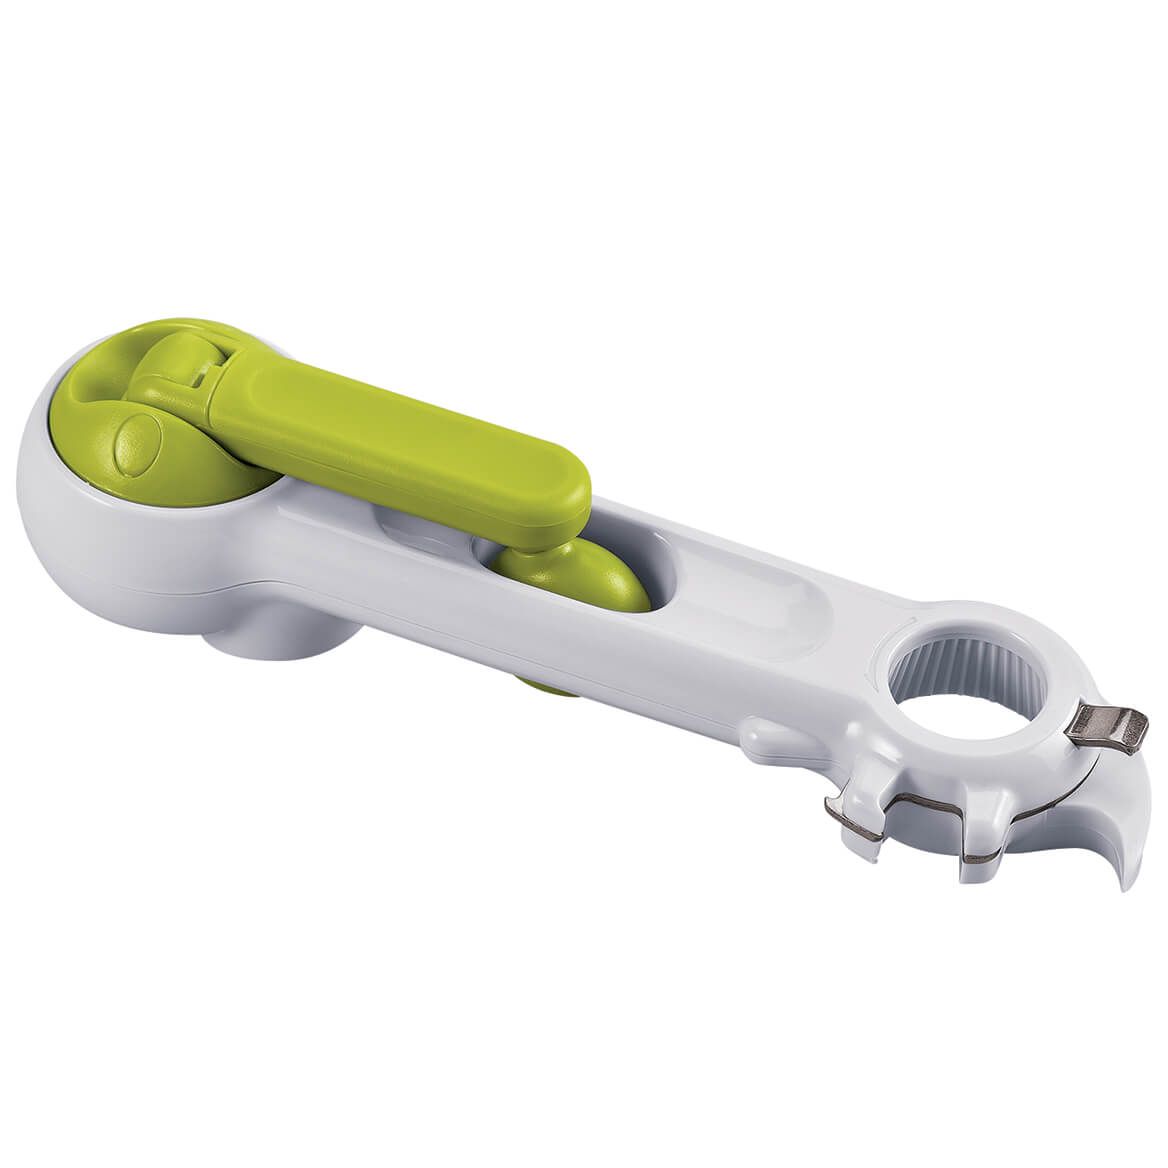 6-In-1 Can Opener by Home Marketplace + '-' + 374750